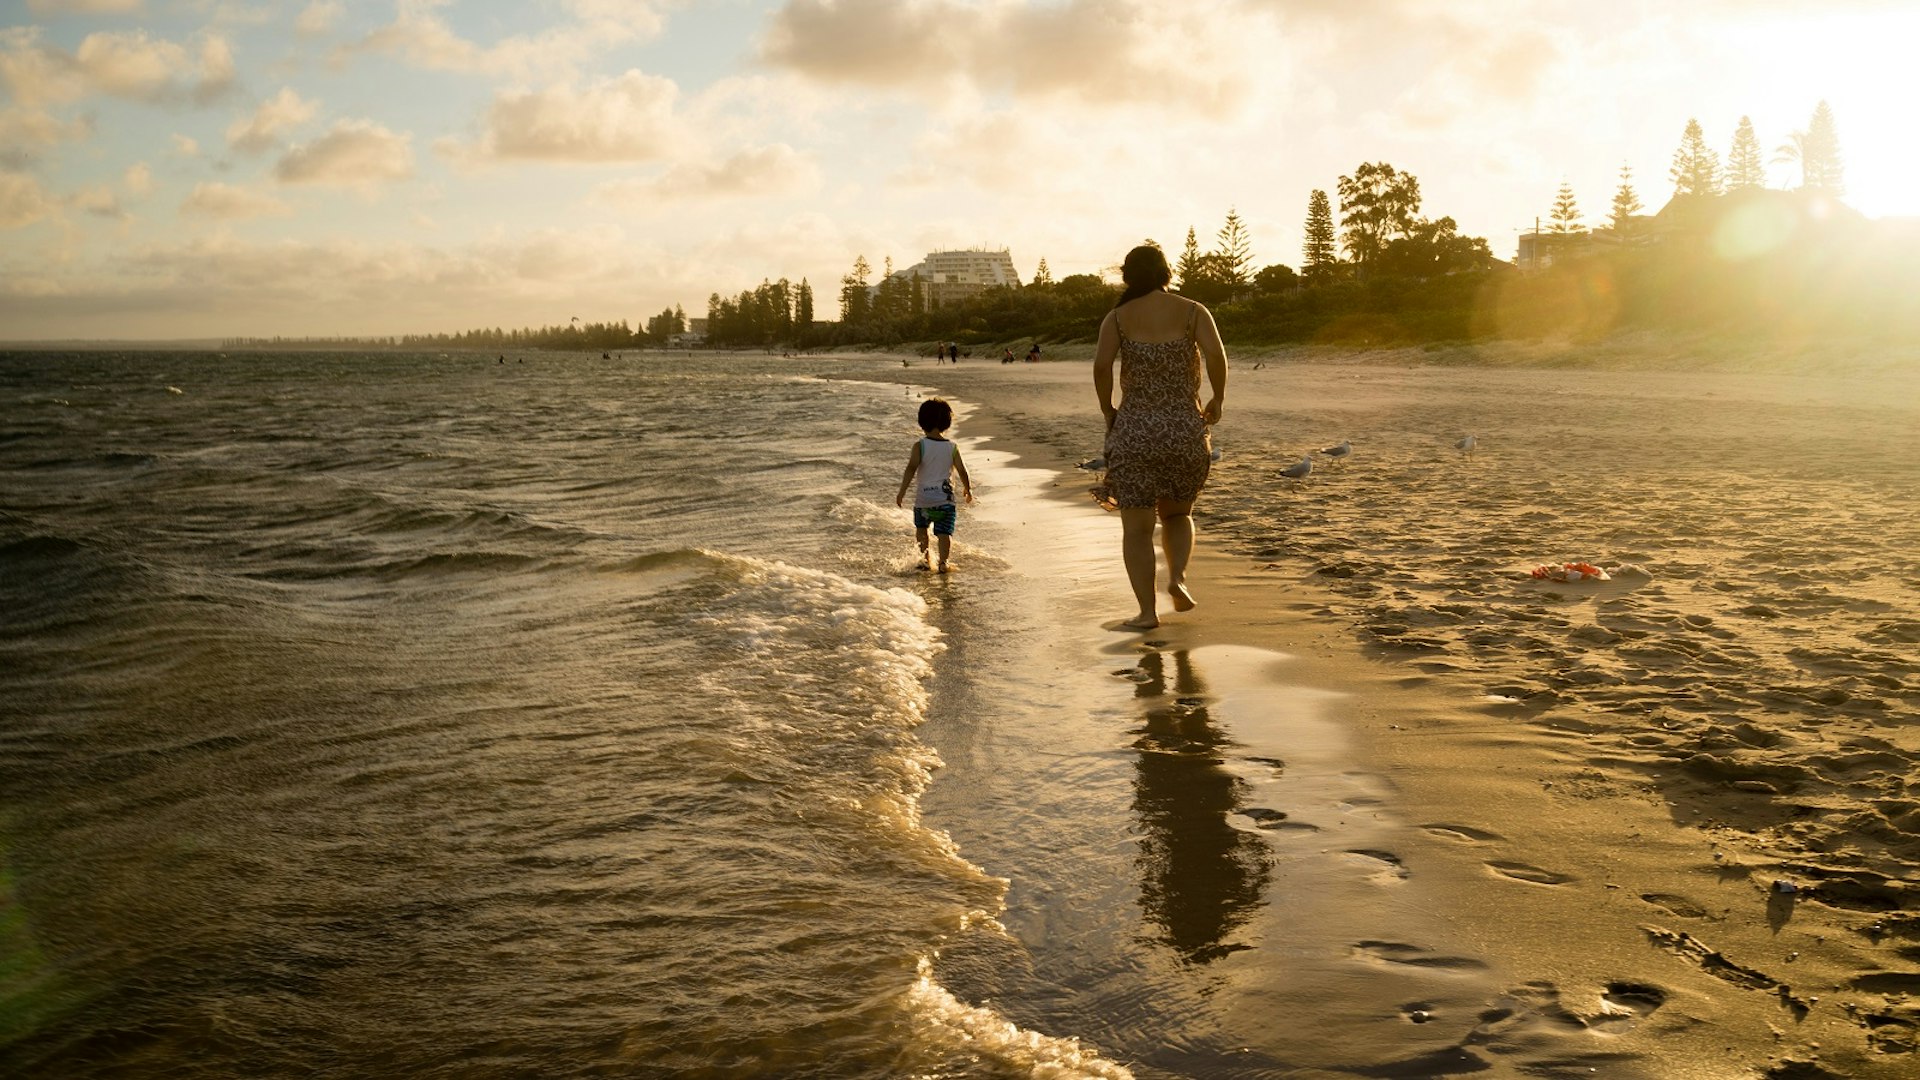 A parent and toddler are silhouetted as they walk on the edge of the sea away from the camera